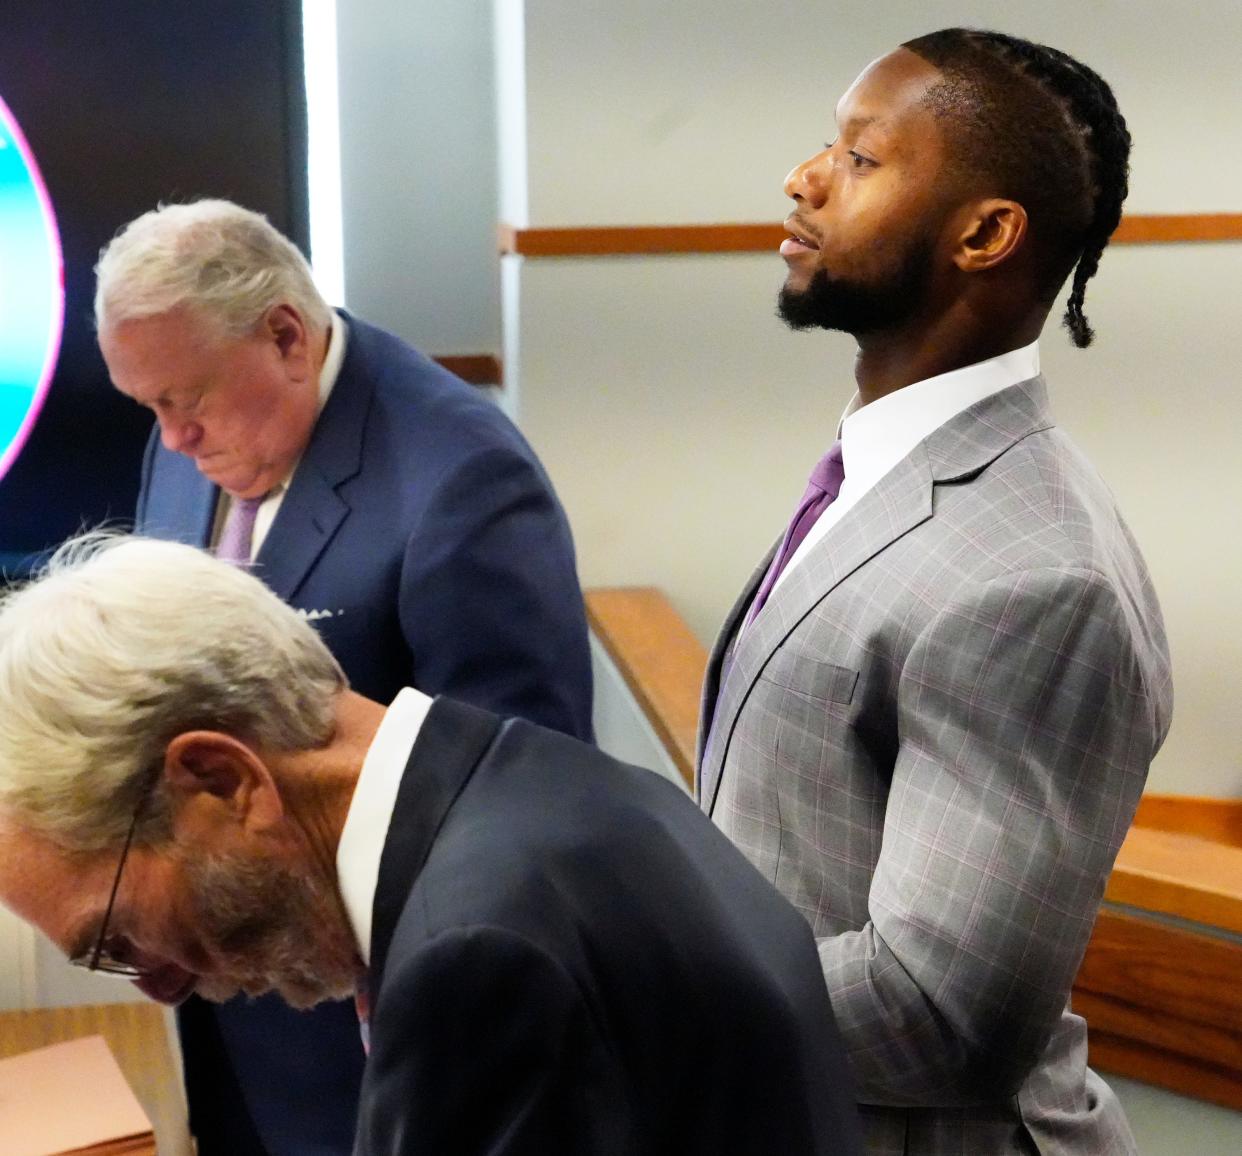 Cincinnati Bengals running back Joe Mixon stands at the start of day two of his aggravated menacing bench trial, Tuesday, August 15, 2023. His attorney’s are Meryln Shiverdecker, left, and Scott Croswell. Hamilton County Municipal Judge Gwen Bender is presiding over what prosecutors say was a road-rage incident involving a gun on Jan. 21, 2023 in downtown Cincinnati. 